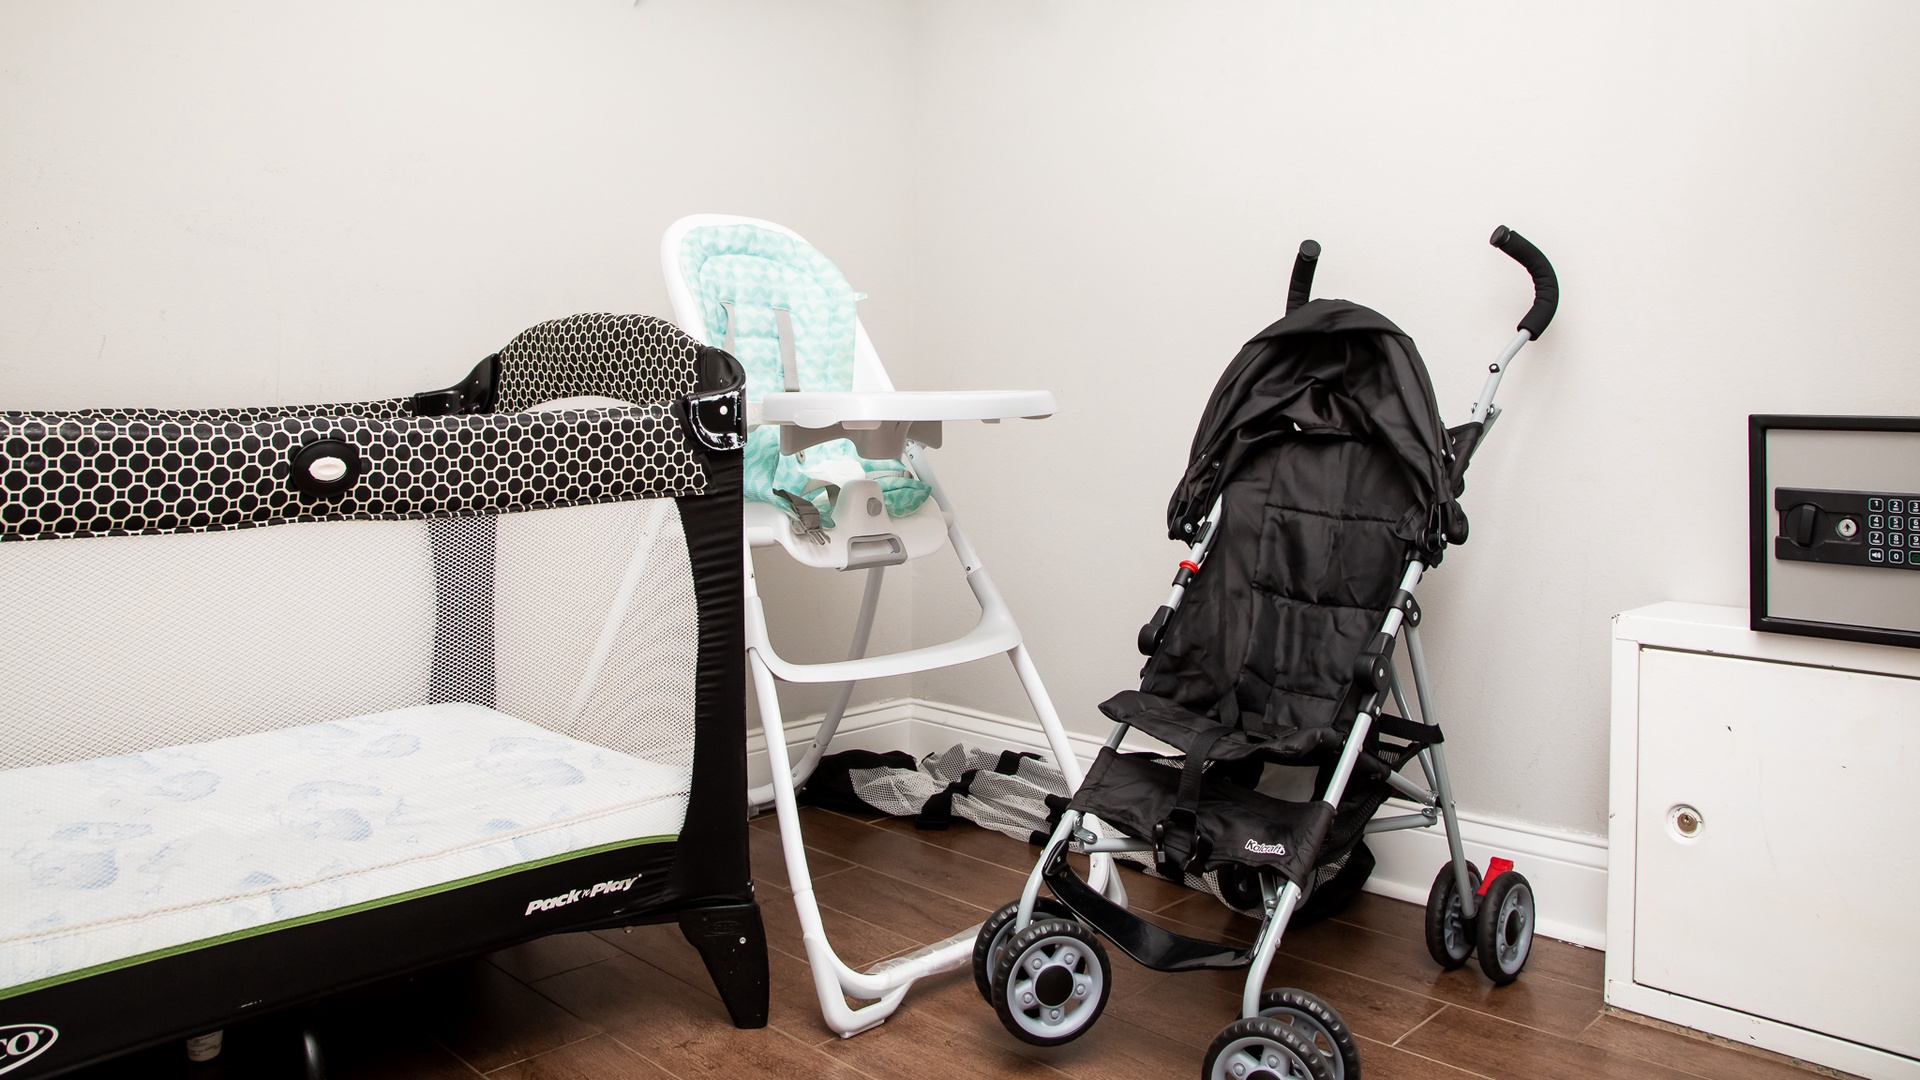 You can keep you crib, hig chair, and stroller at home - these will all at your fingertips for use!